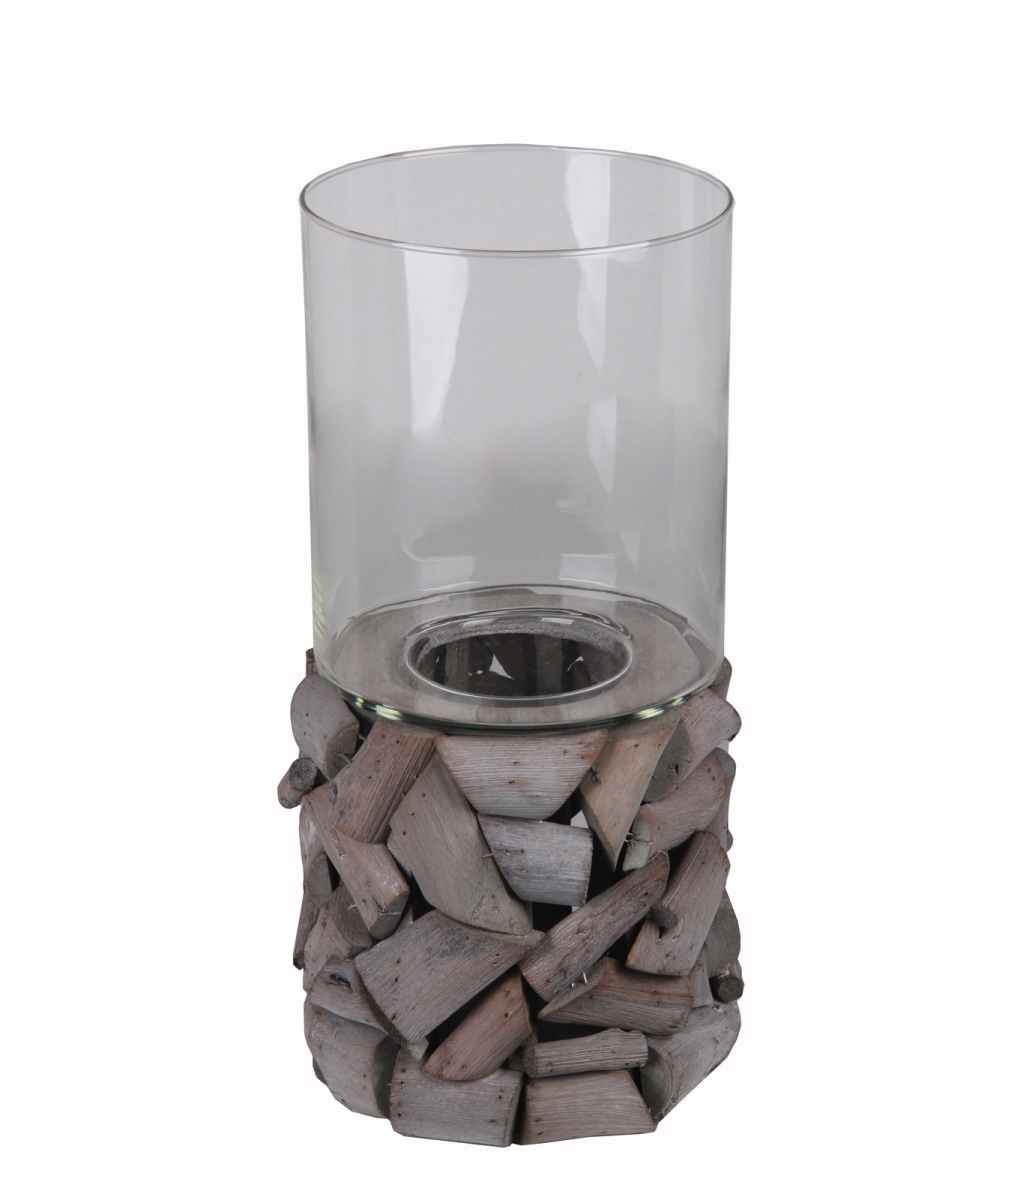 88071 8 X 8 X 16 In. Glass & Wooden Candle Holder, Brown - Large